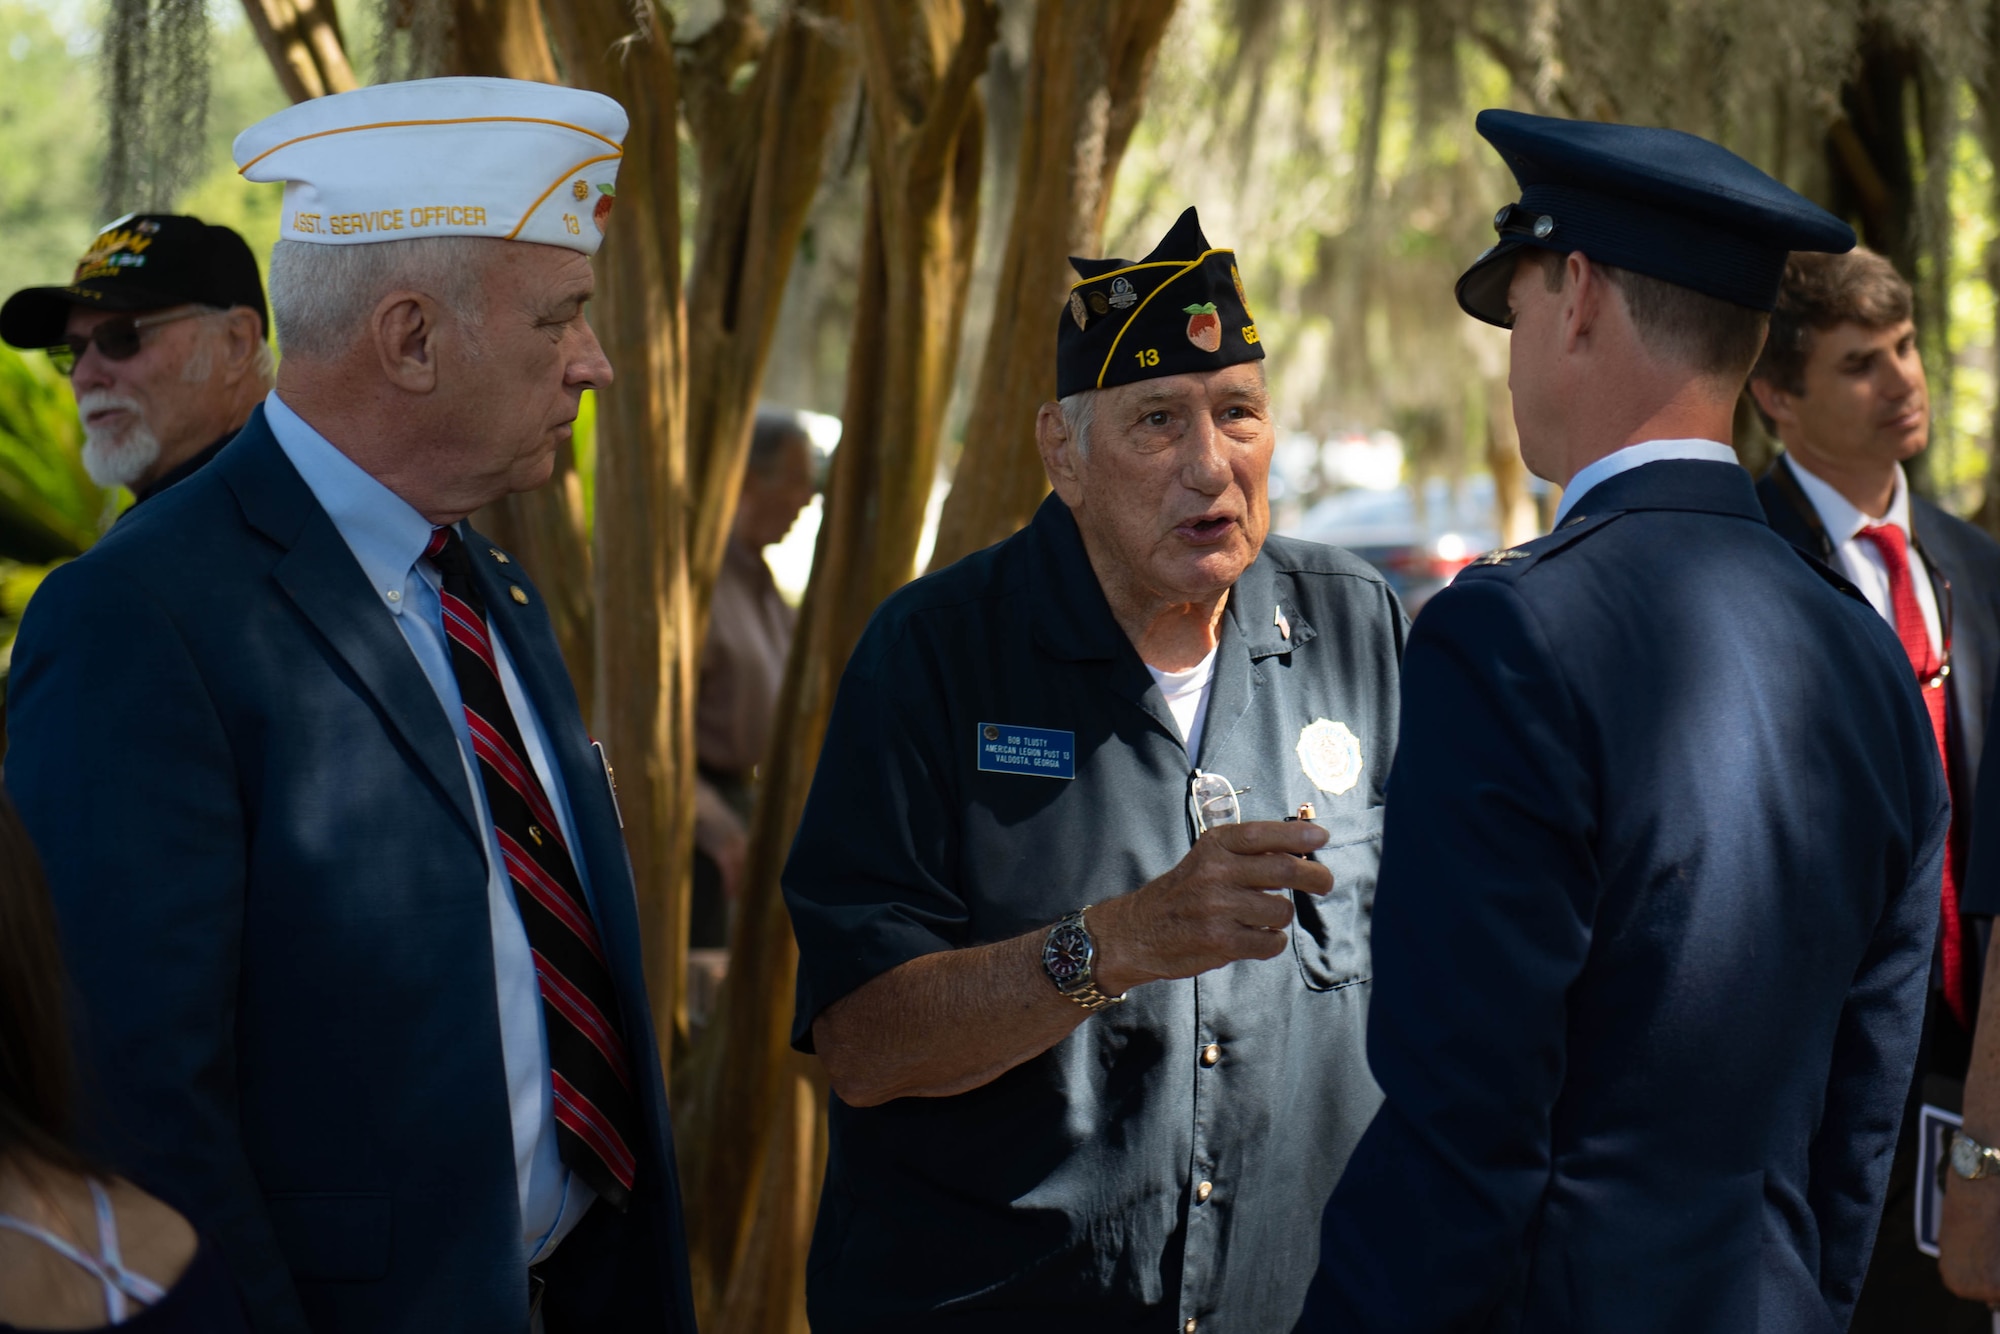 A photo of an Airman speaking to veterans.